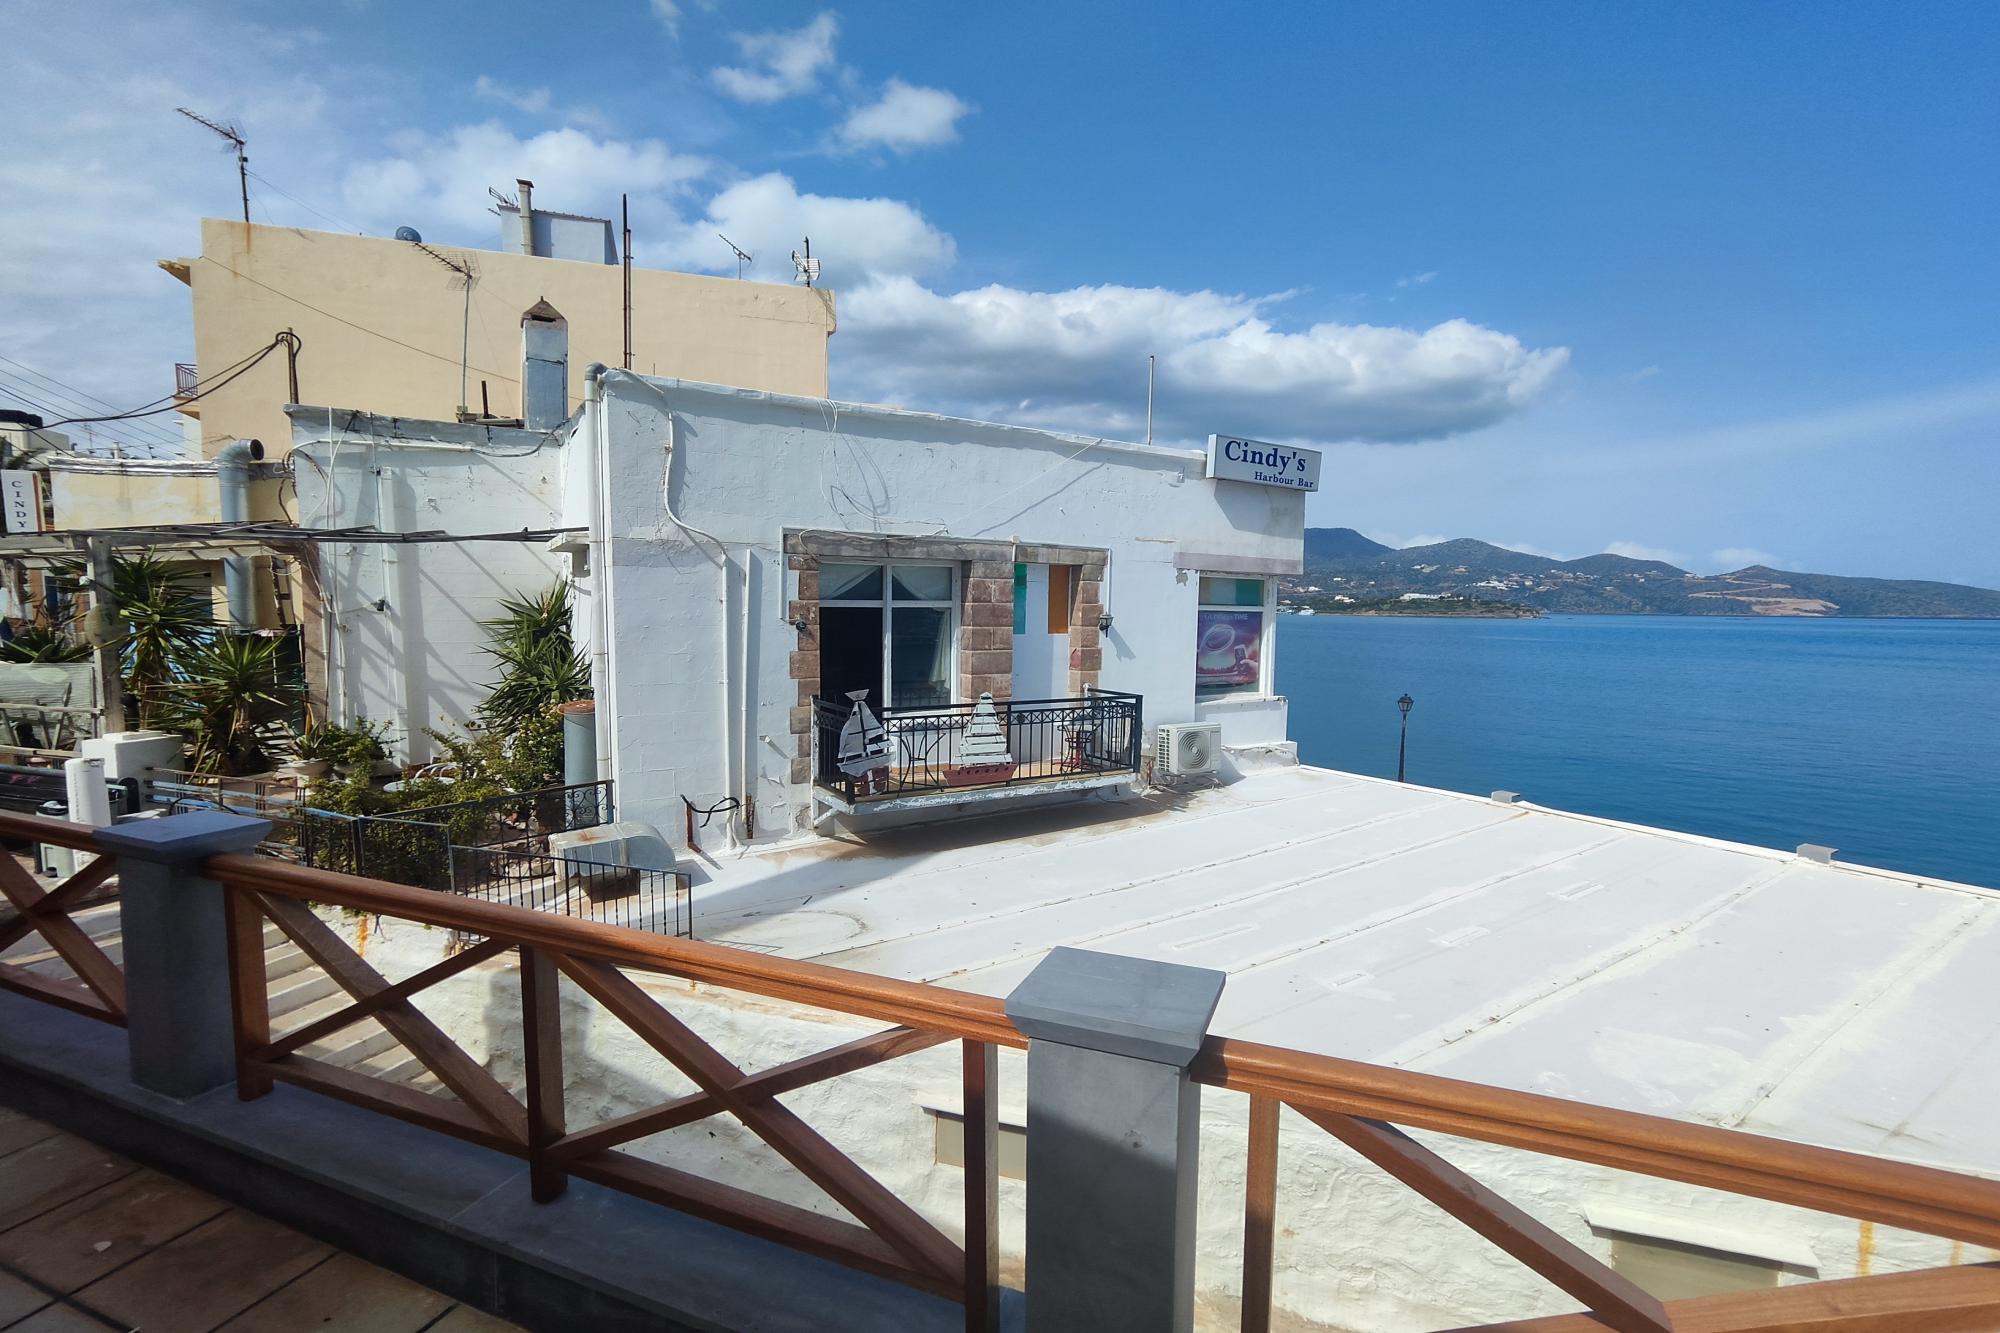 Fully equipped bar business for sale in tourist town harbour. Amazing sea views.